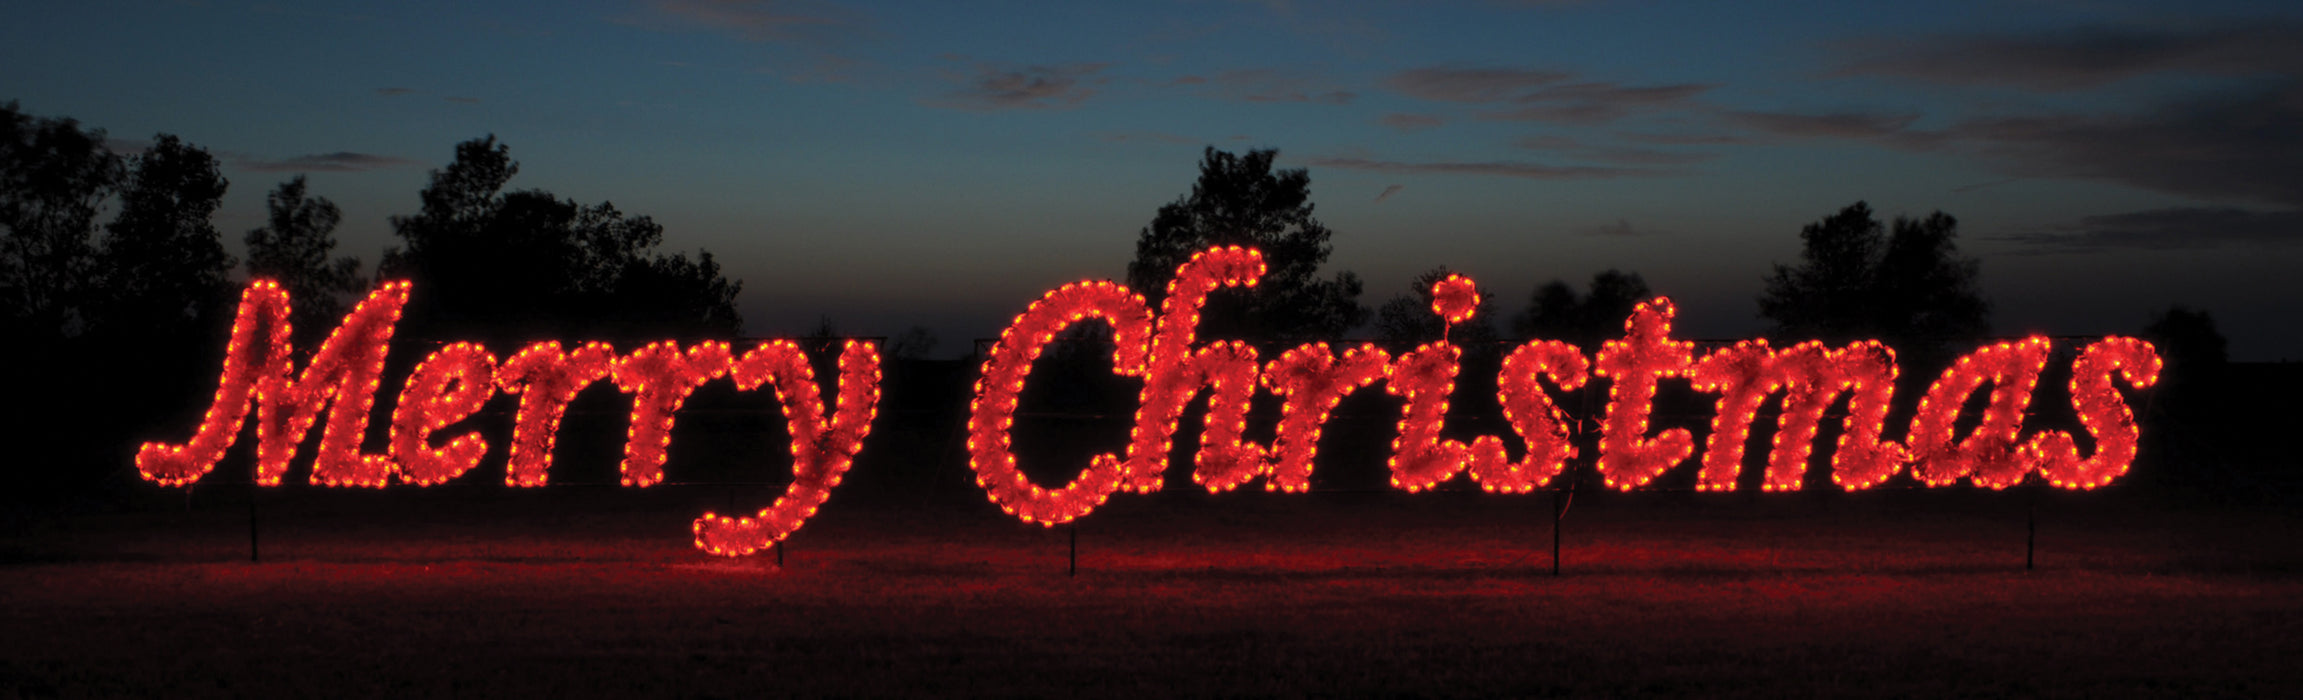 giant, large, commercial-grade, outdoor, sign, script, merry Christmas, holiday, LED, bulb, C7, red, garland, light, quality, durable, traditional, yard motif, 2021